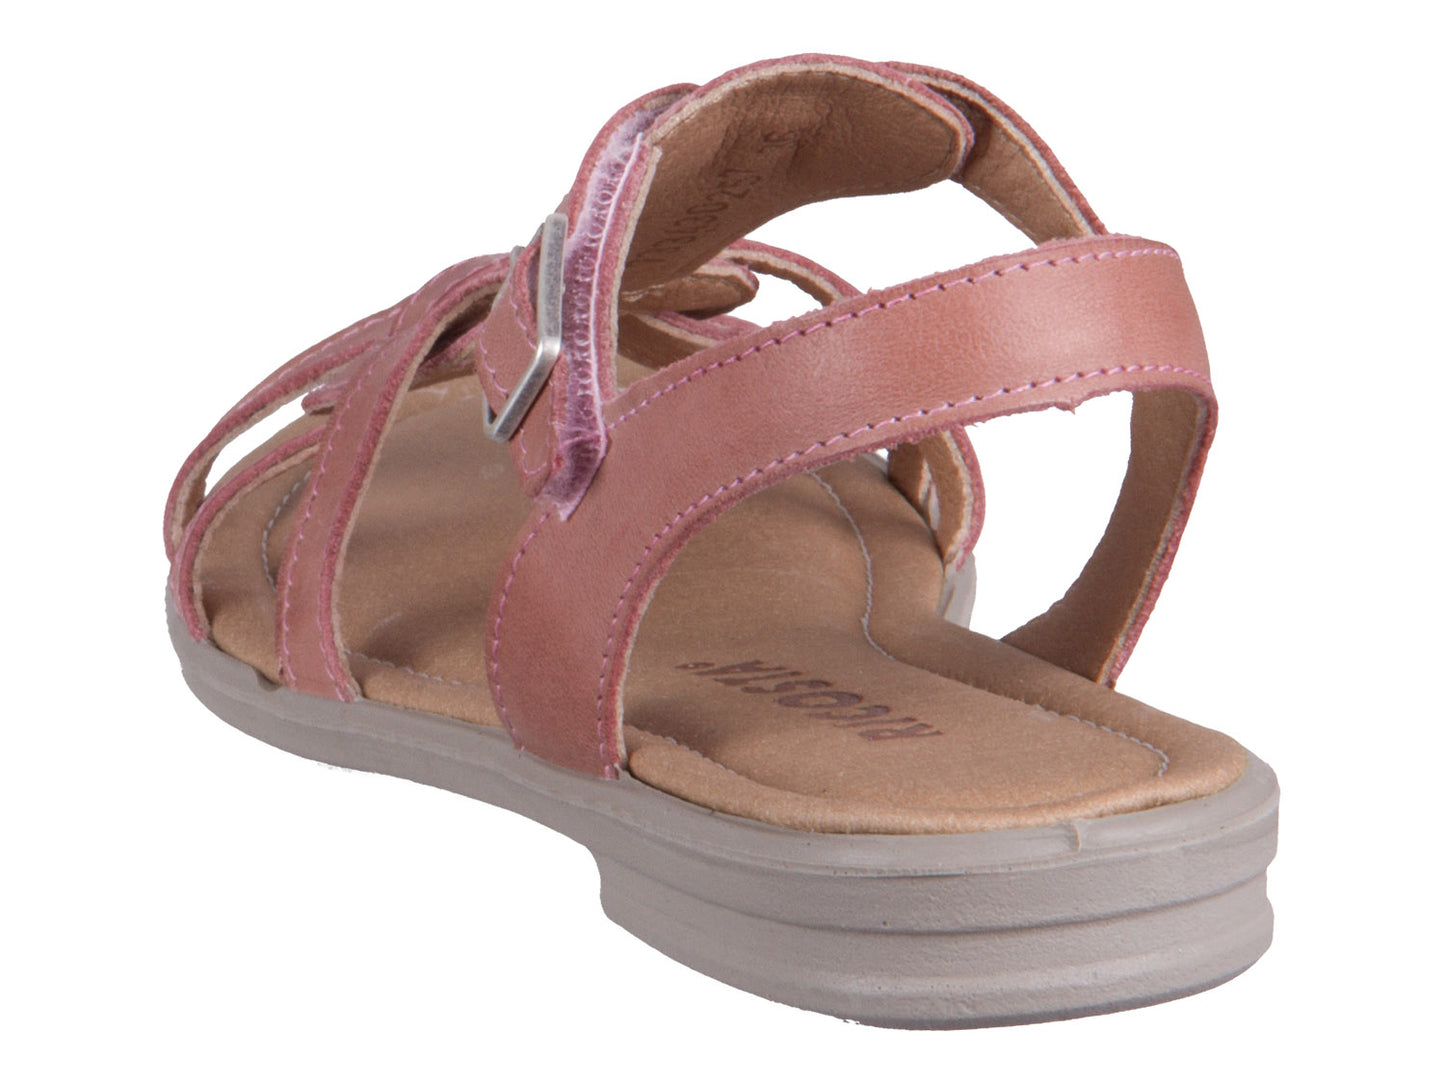 A girls open toe sandal by Ricosta, style Birte, in pink leather with velcro fastening. Back angled view.